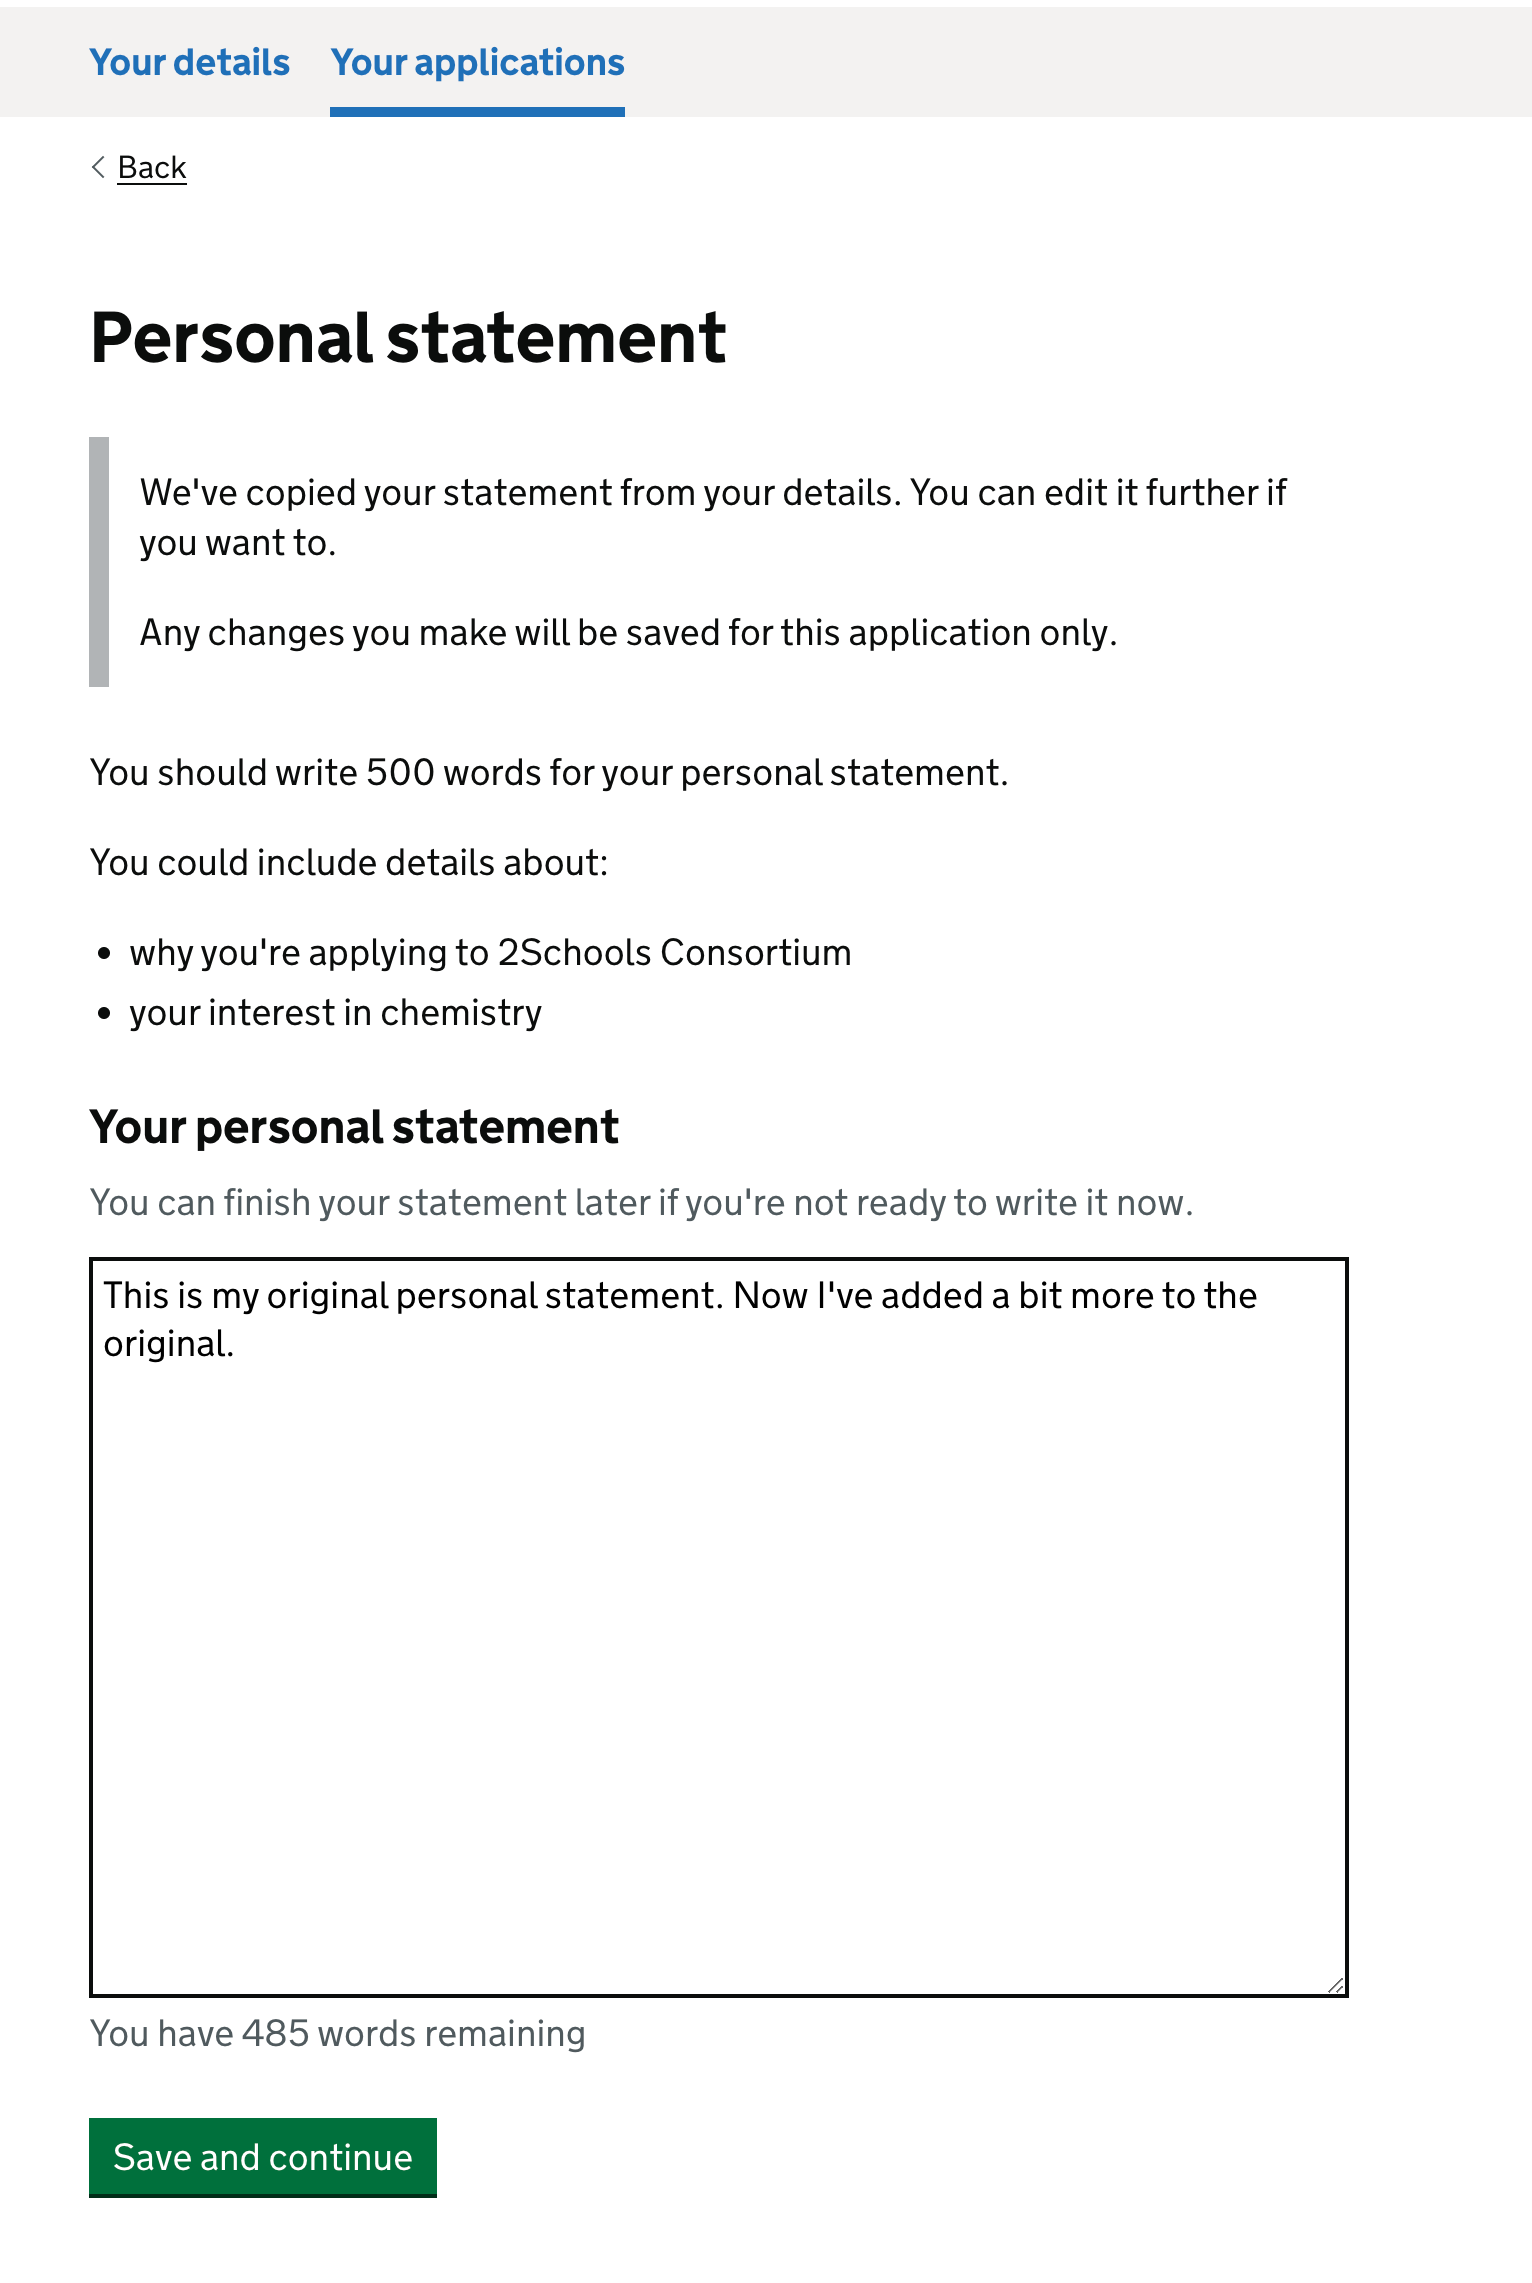 Screenshot of the personal statement question in the 'Your applications' tab. There is inset text telling the candidate we've copied their 'master' version of the statement and they can edit it further. Any changes they make will only show for this application.